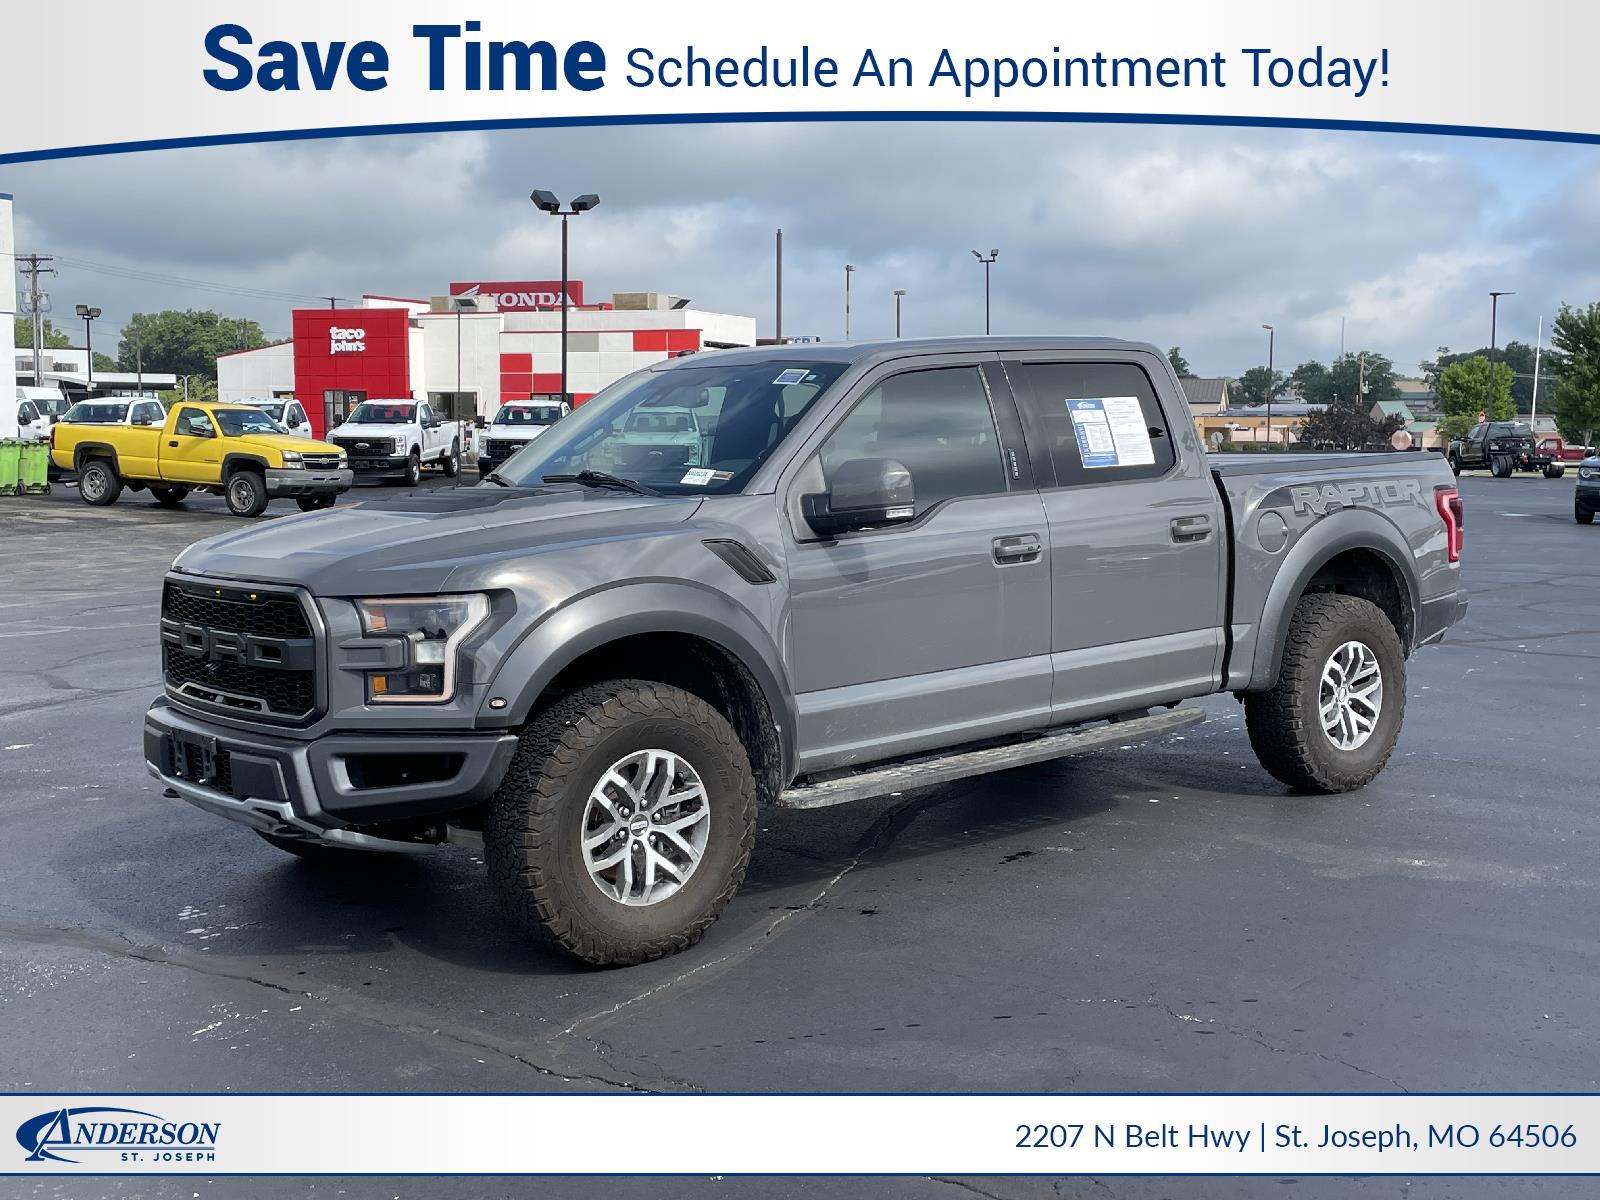 Used 2018 Ford F-150 Raptor Stock: 3002023A